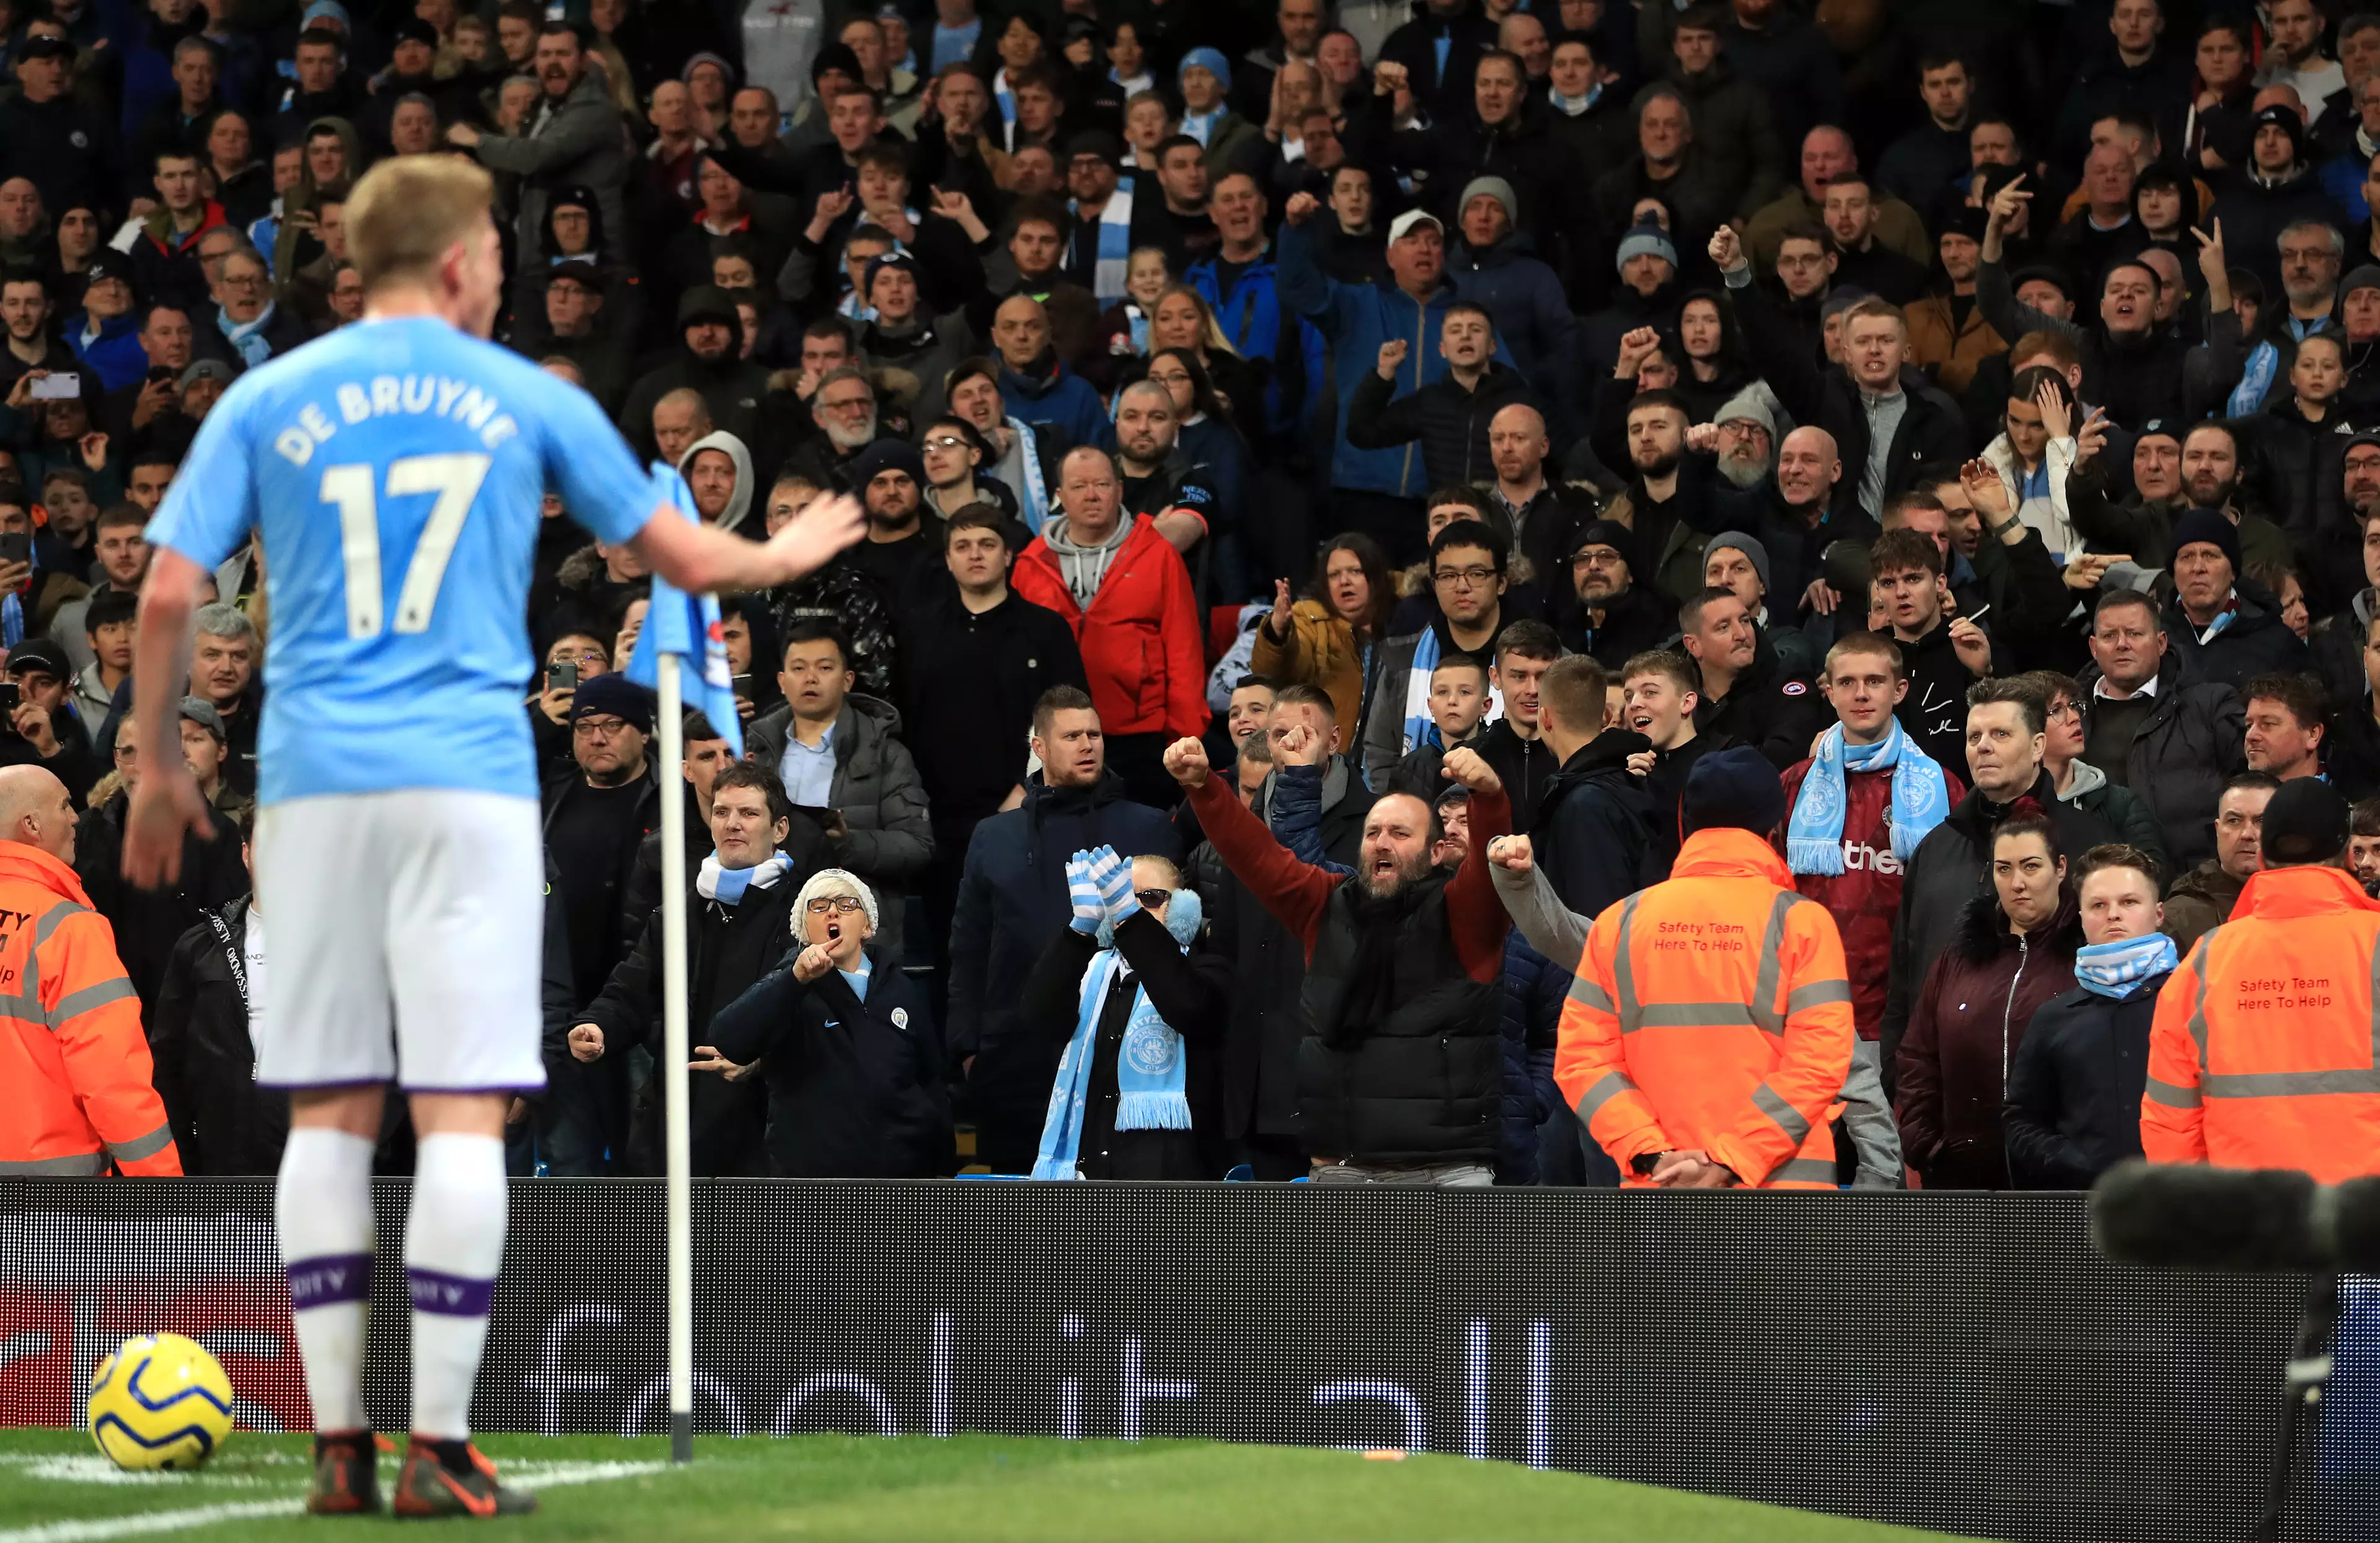 Kevin de Bruyne tried to calm Manchester City fans in the corner down